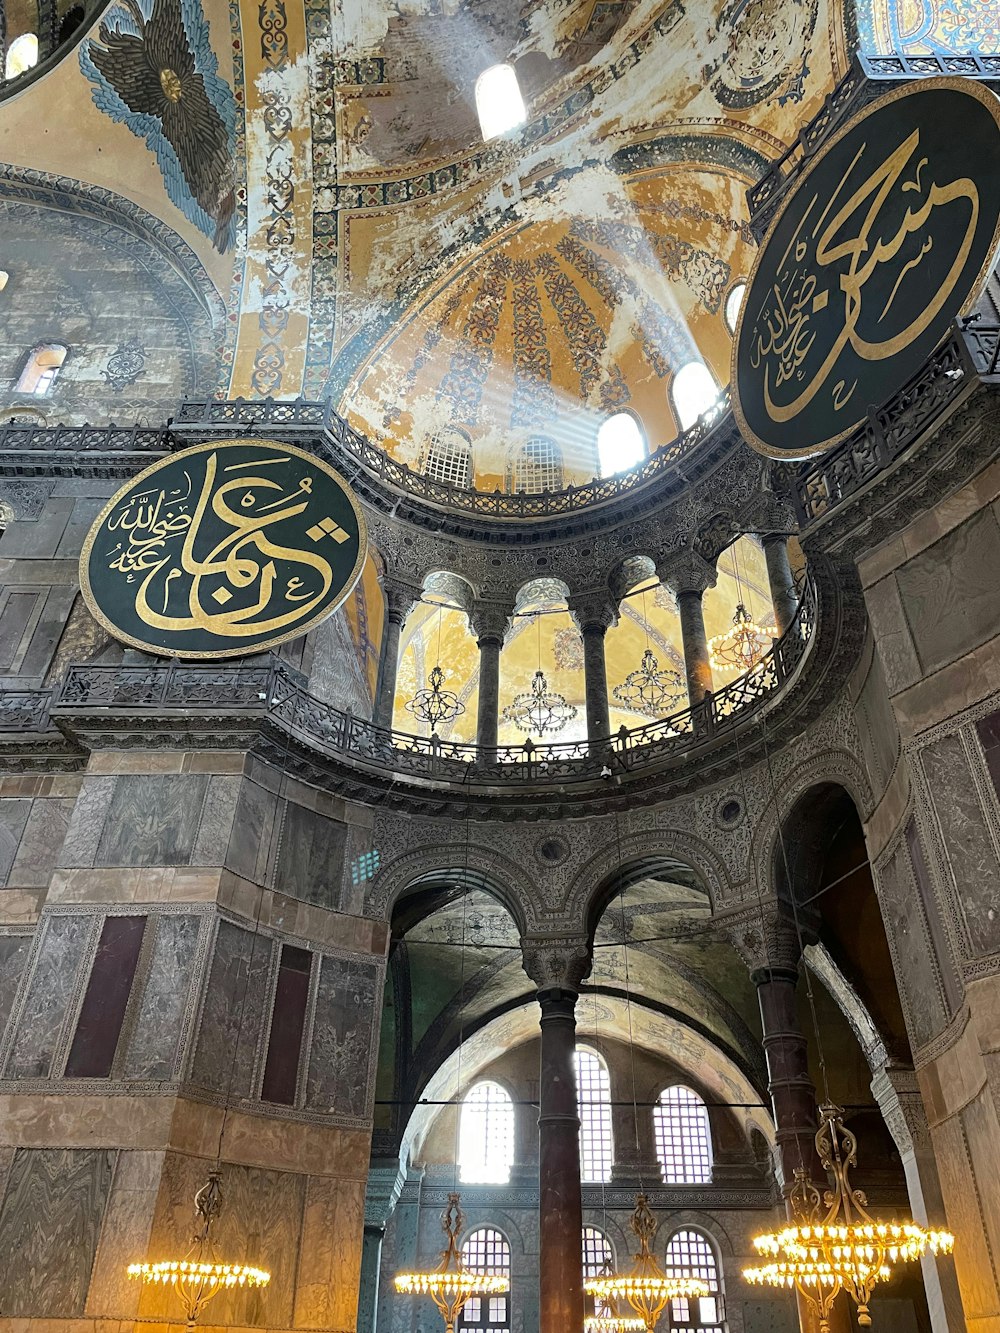 a large ornate ceiling with arched windows with Hagia Sophia in the background